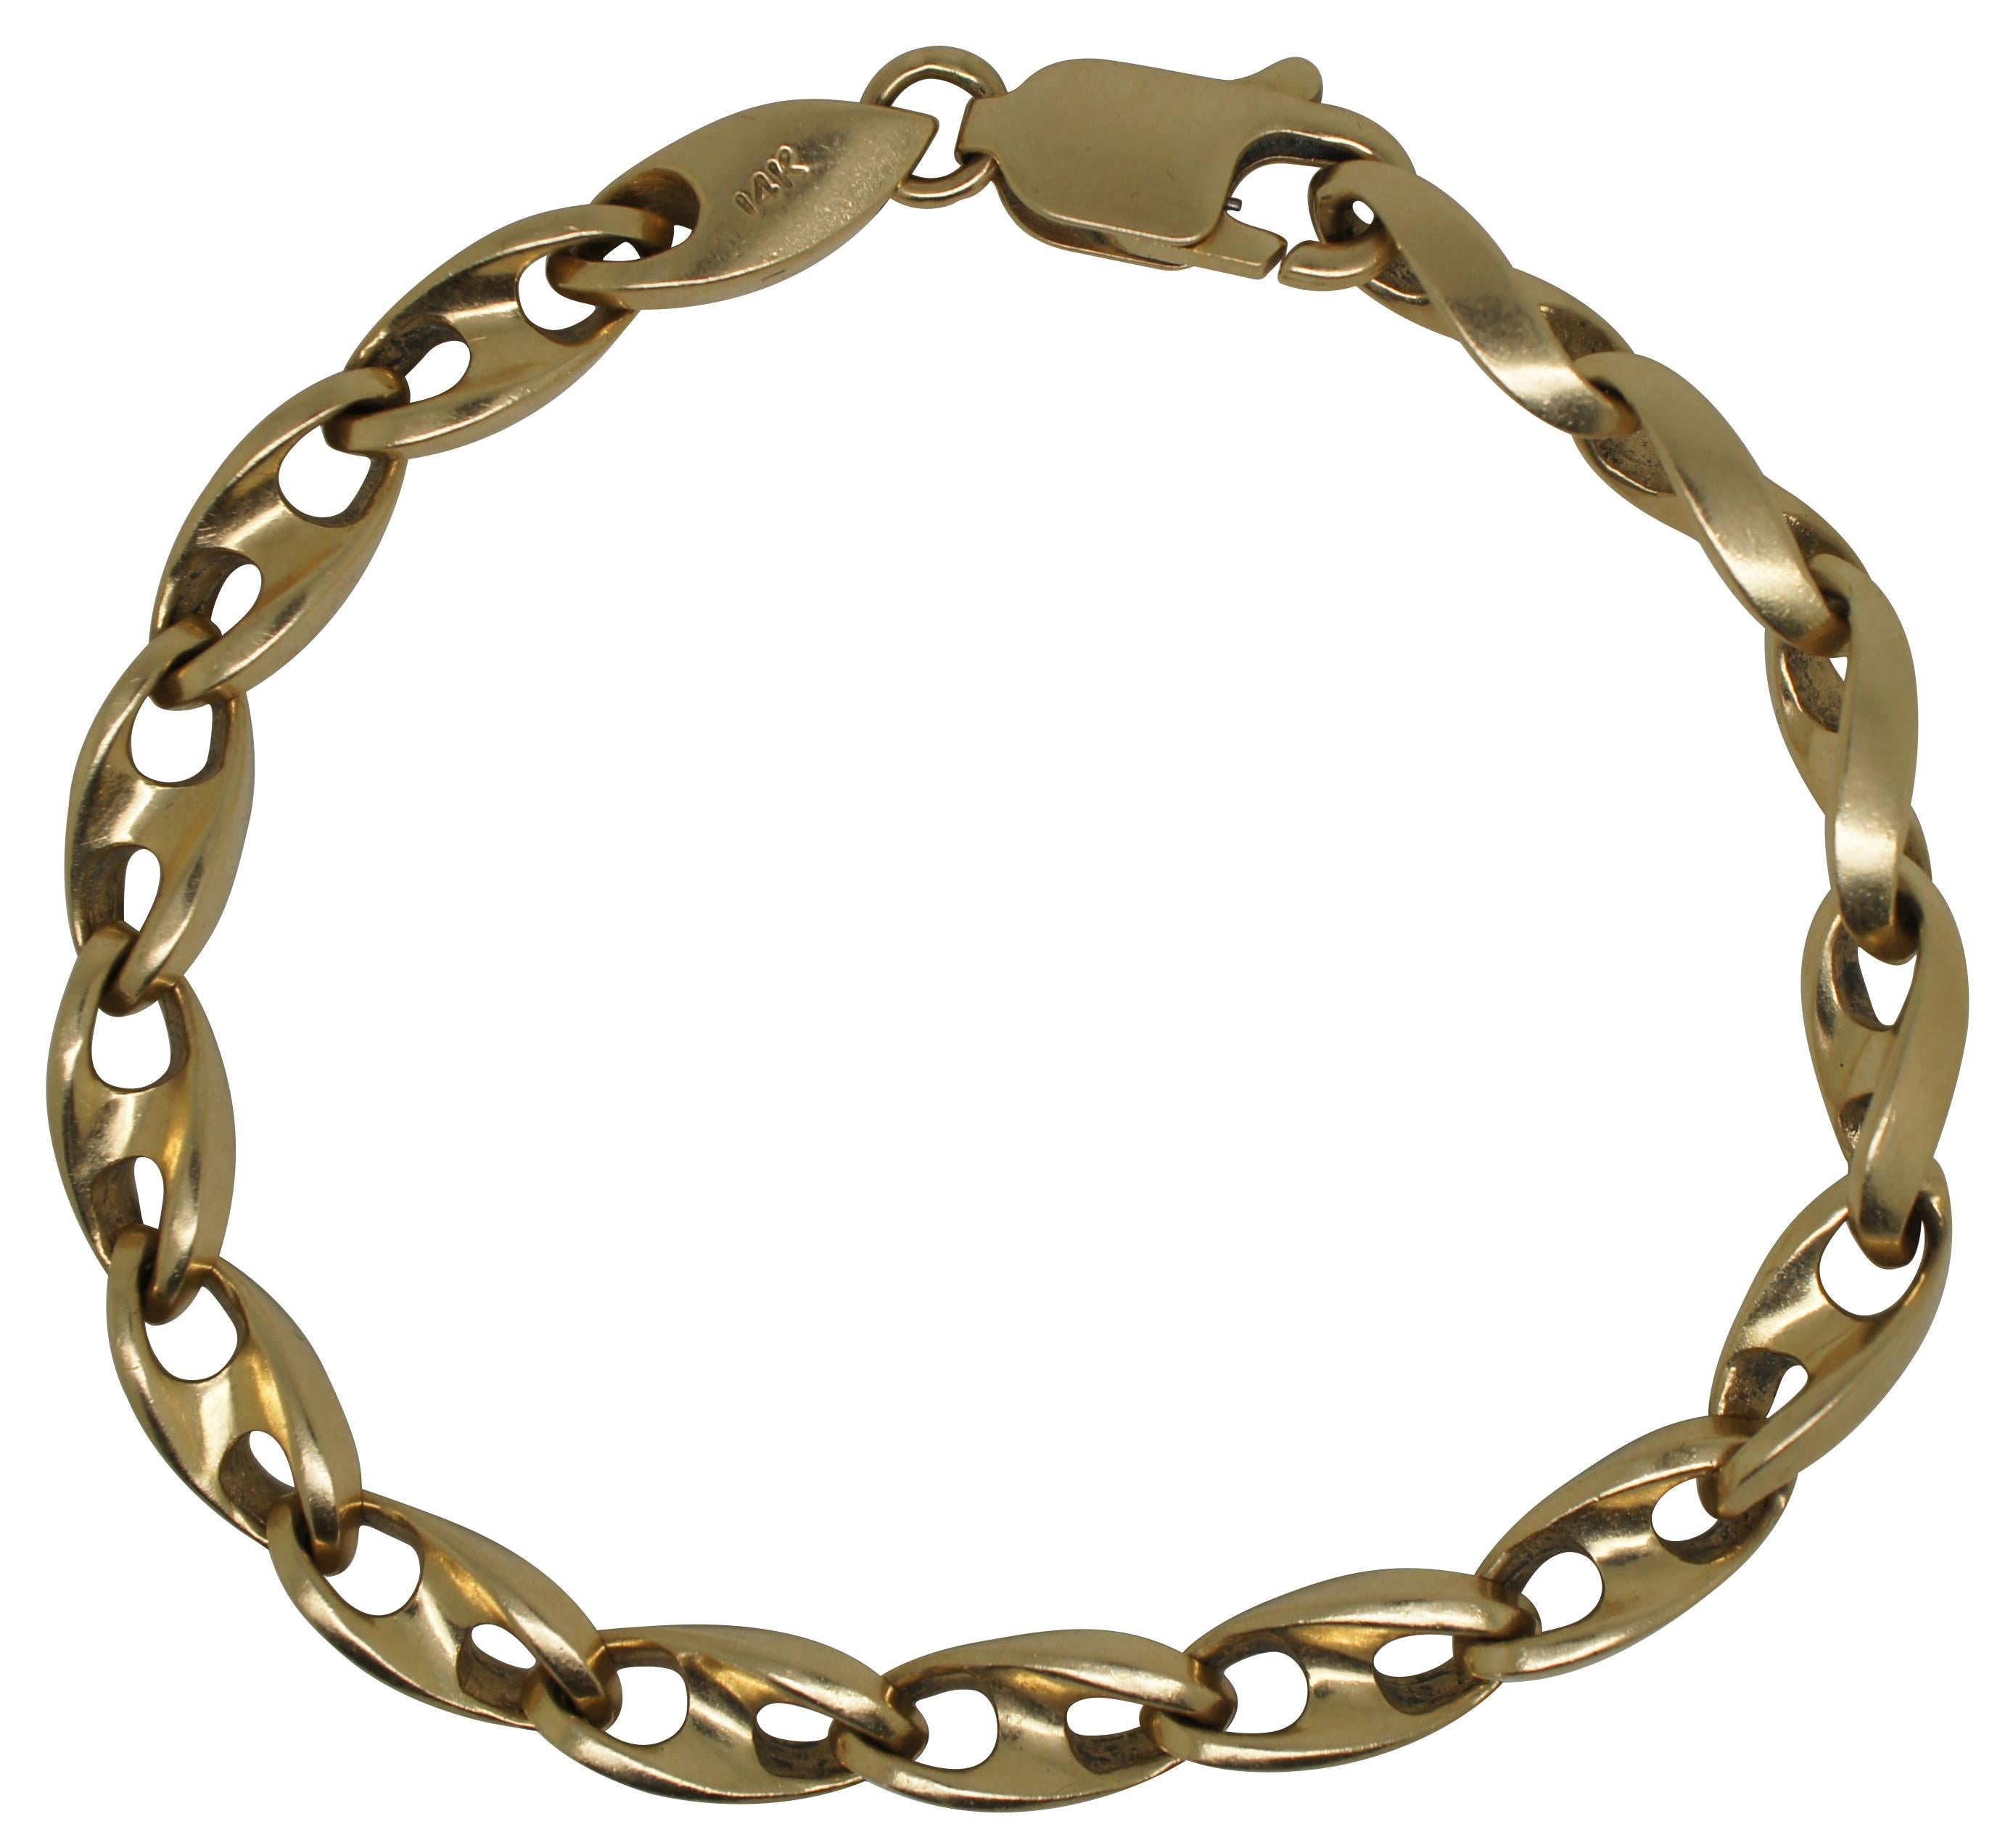 Vintage 14k / 585 (58.5% gold) yellow gold 6.35mm wide barleycorn chain bracelet with lobster claw clasp. Made in Italy.

Measures: 7.5” x 0.25” (Length x Width) / 21.4 g.